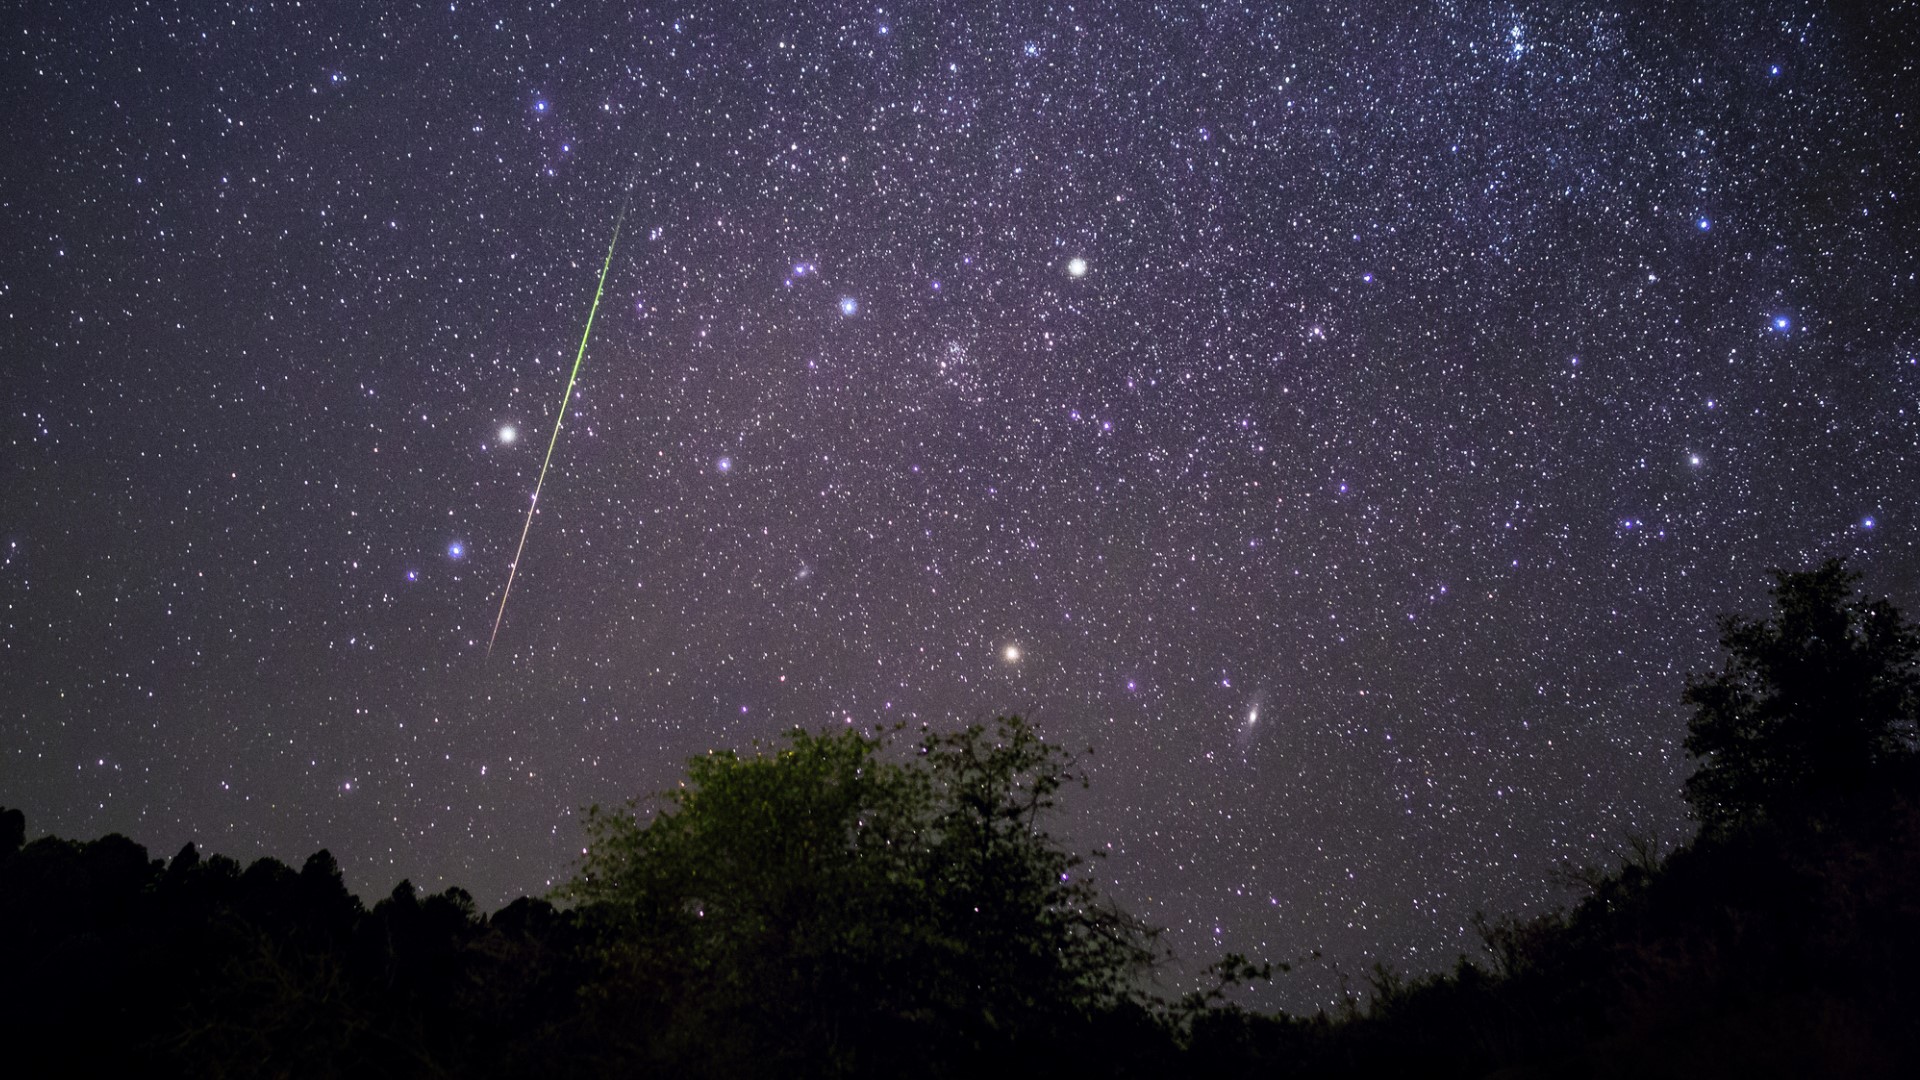 You've heard of shooting star, falling star and fireball. What are the different names for things that fall from space to earth and how accurate are they?